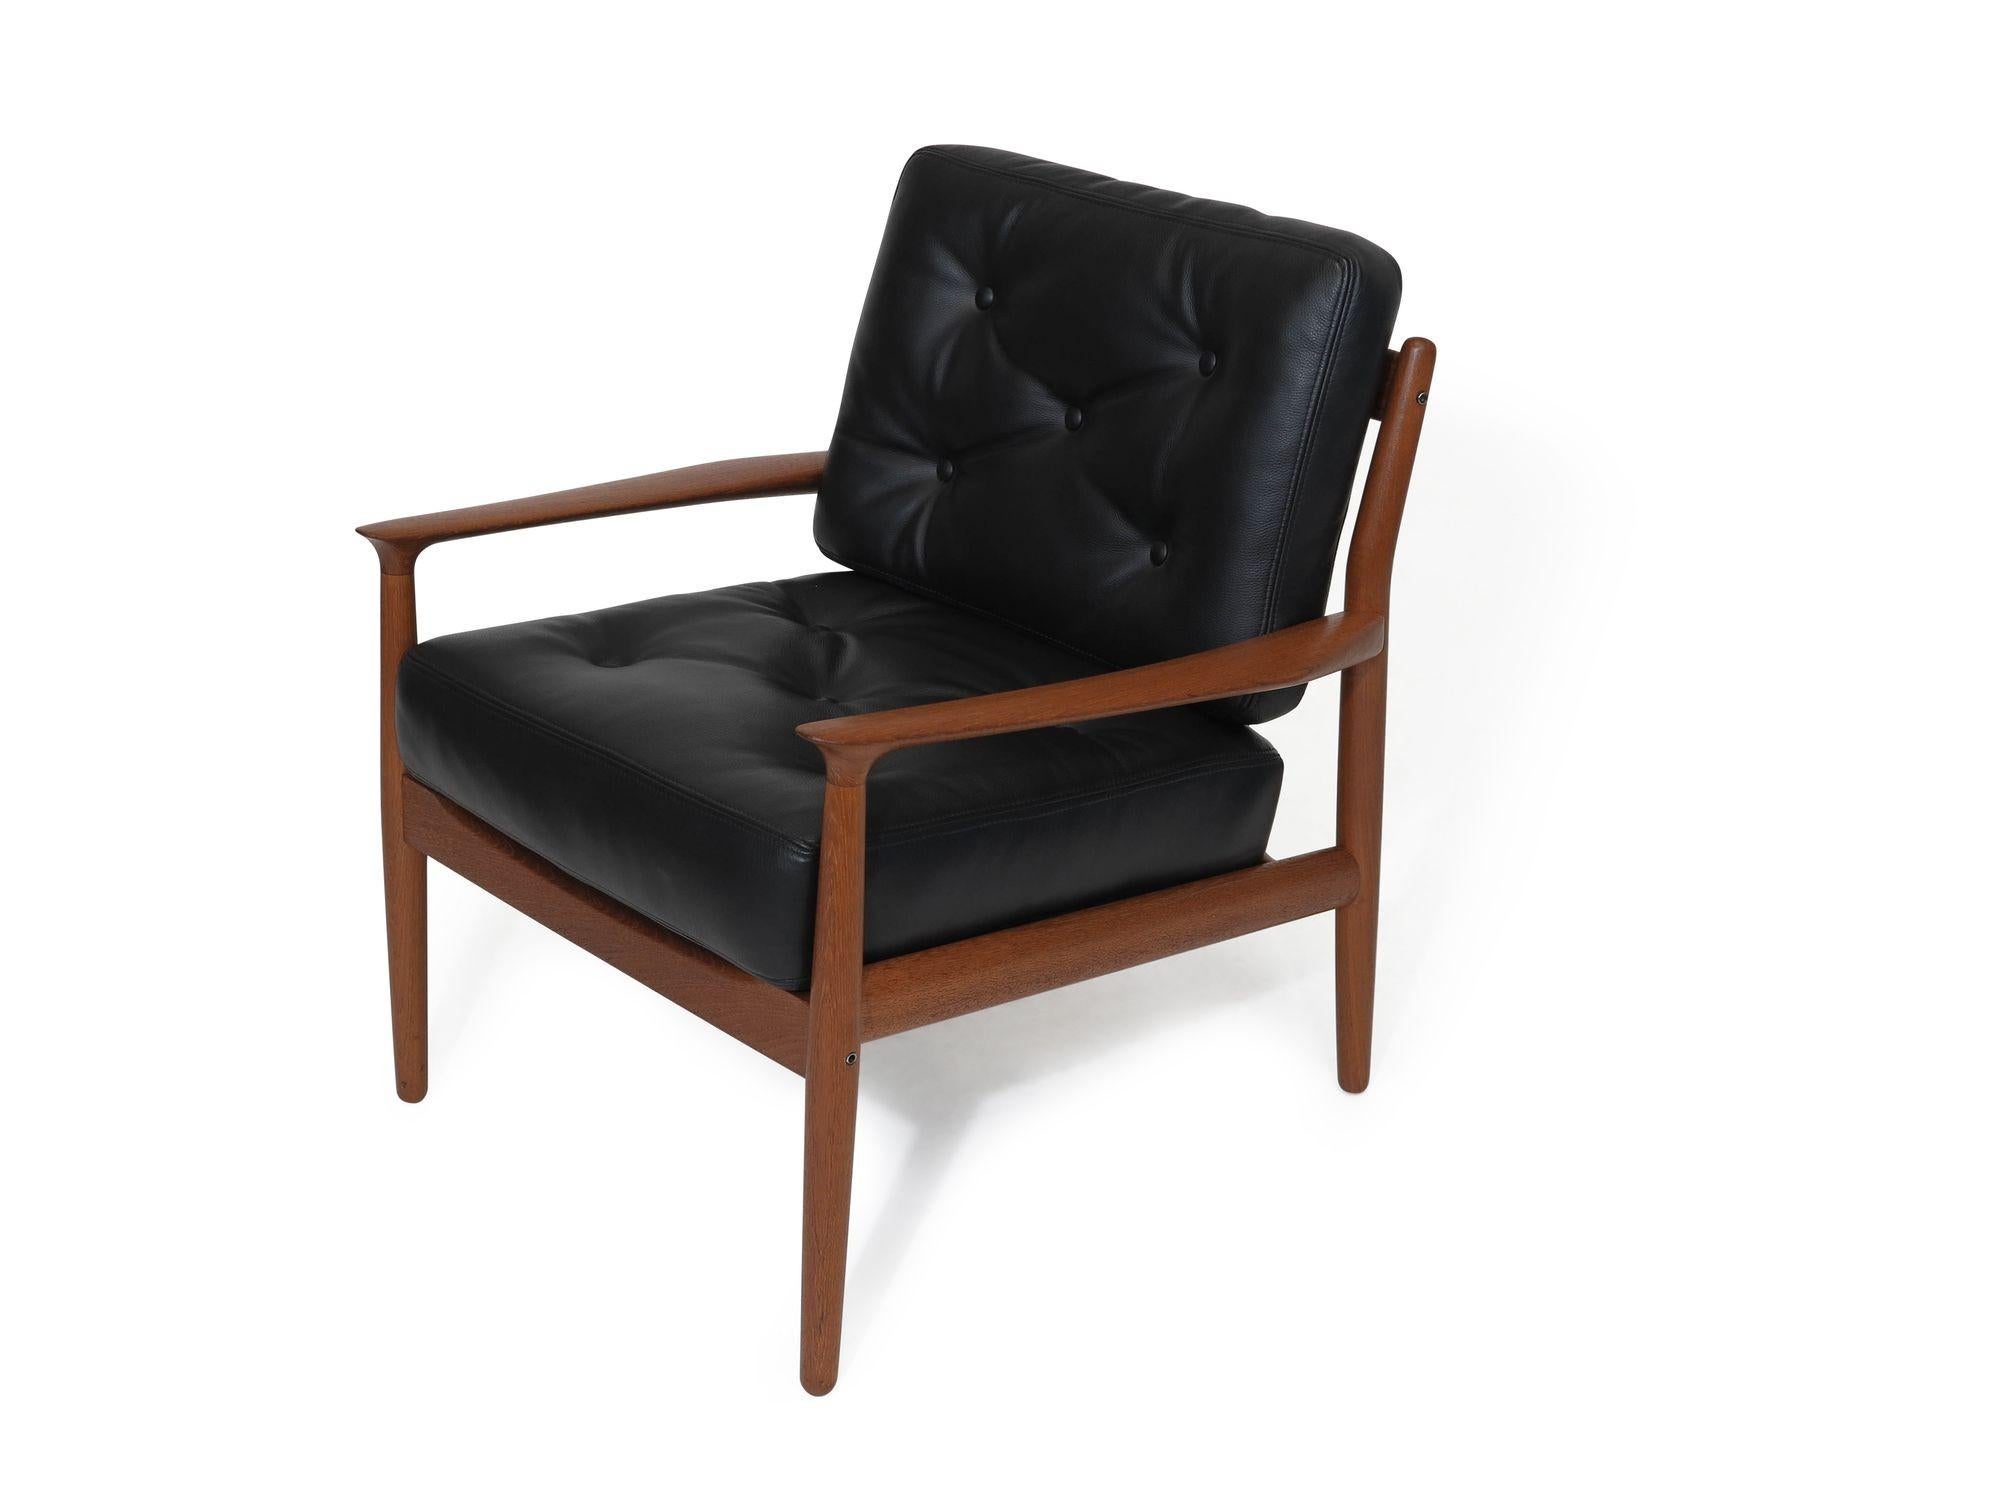 Oiled Grete Jalk Danish Teak Lounge Chairs in Black Leather